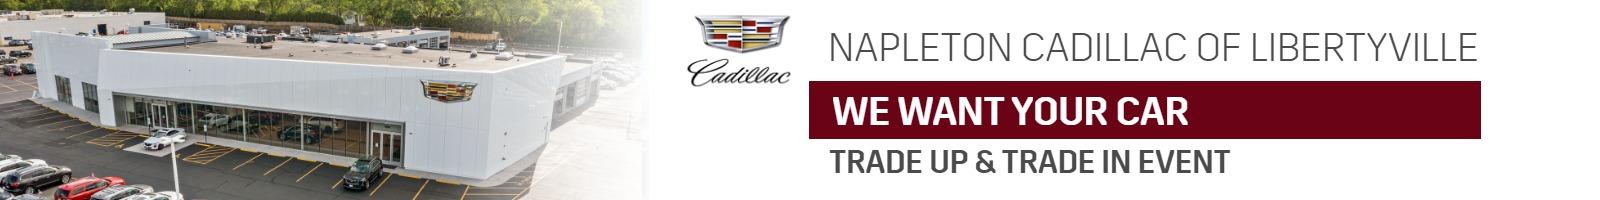 Trade in & Trade Up banner-new store photo